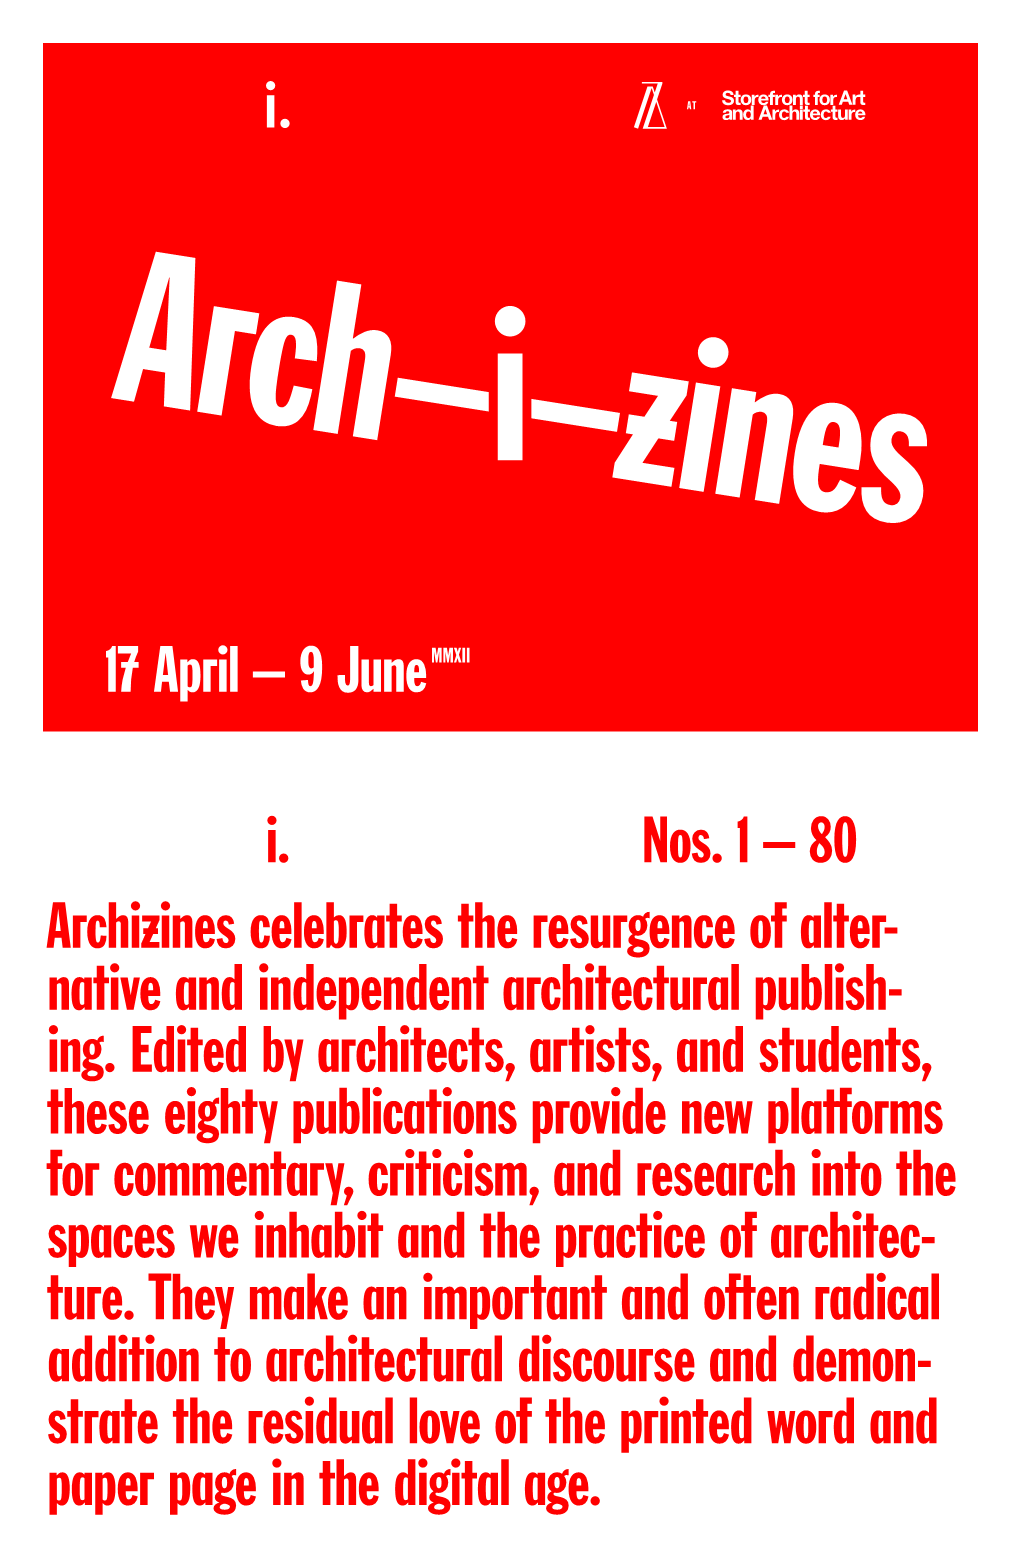 Nos. 1 – 80 Archizines Celebrates the Resurgence of Alter- Native and Independent Architectural Publish- Ing